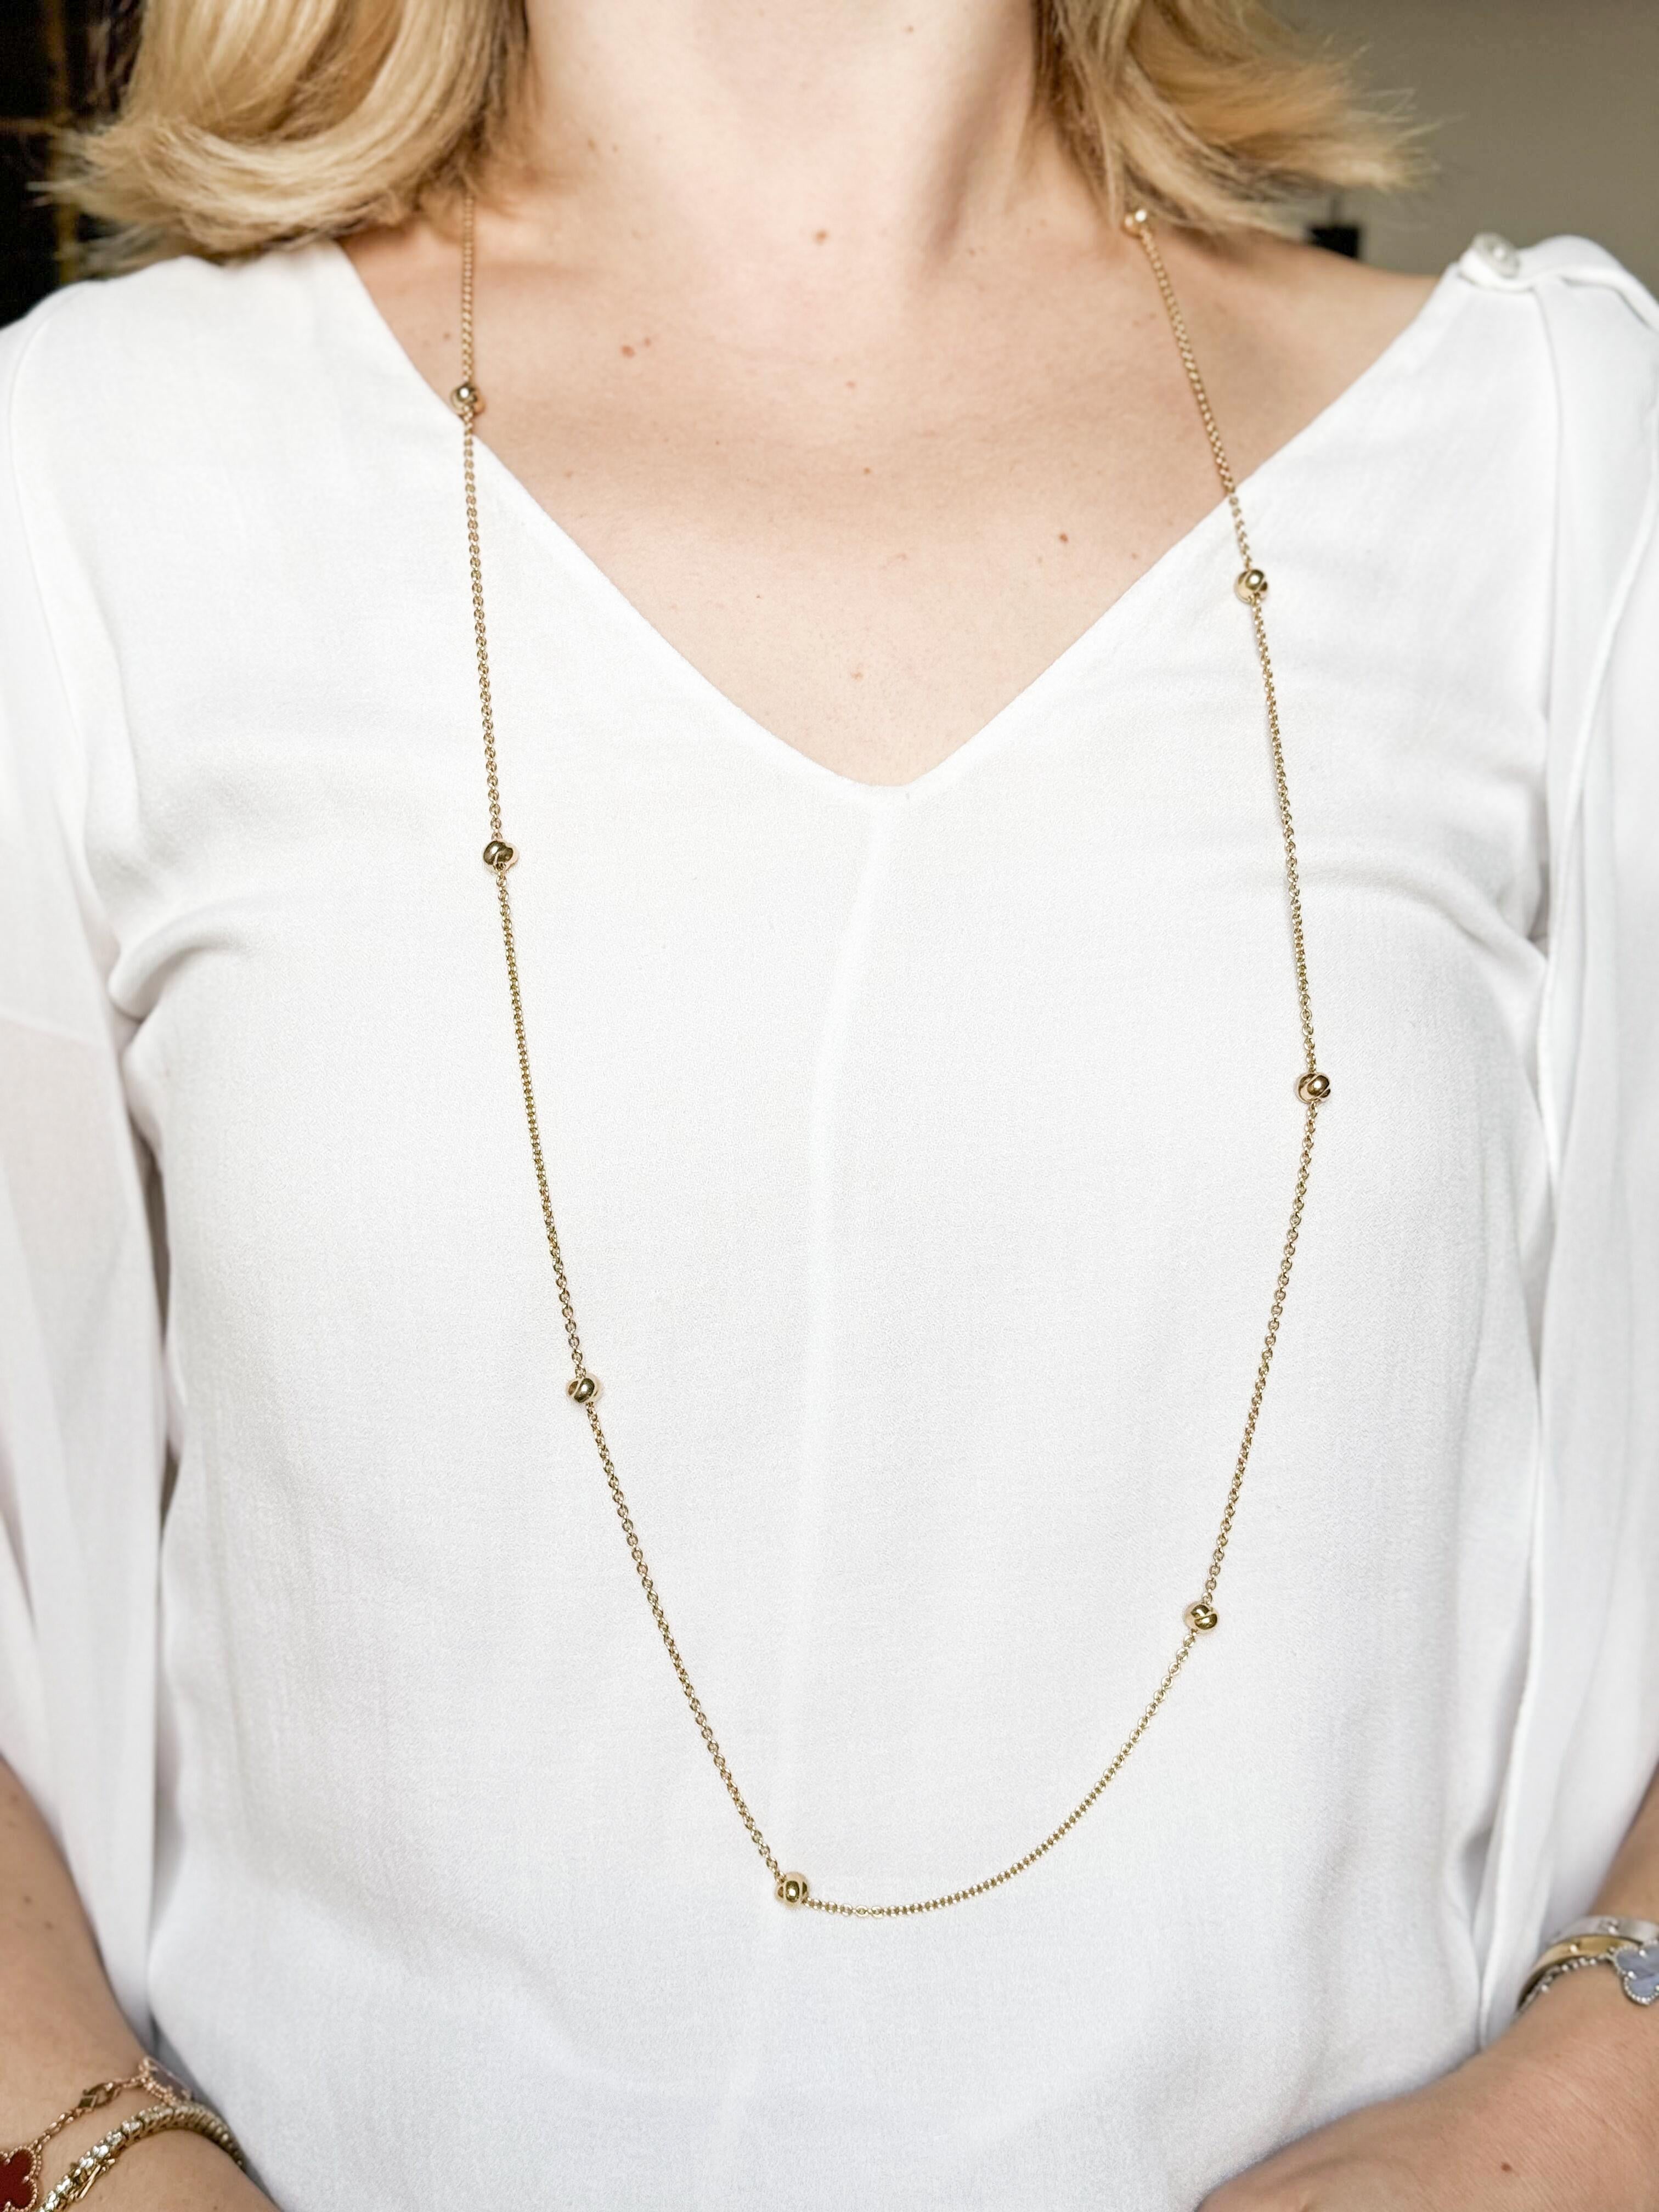 Long 18k gold necklace by Cartier, featuring 9 Trinity knot stations. Necklace is 41.5